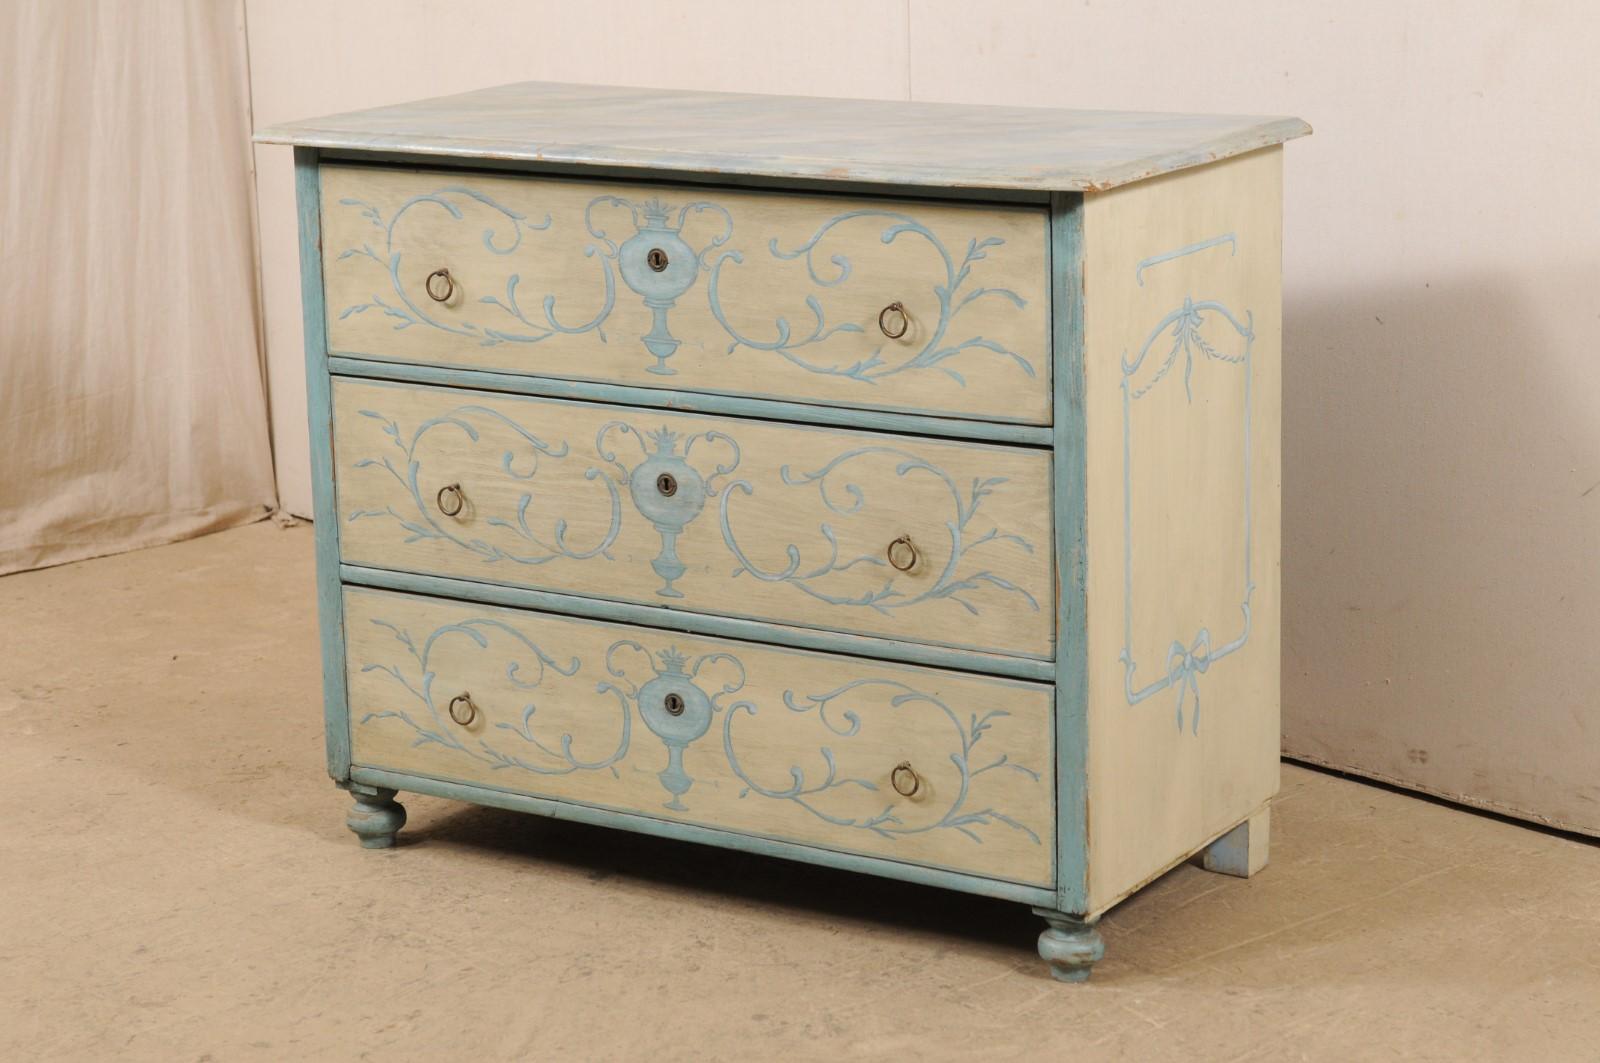 Hand-Painted Antique European Chest with Neoclassical Inspired Painting and Faux Marble Top